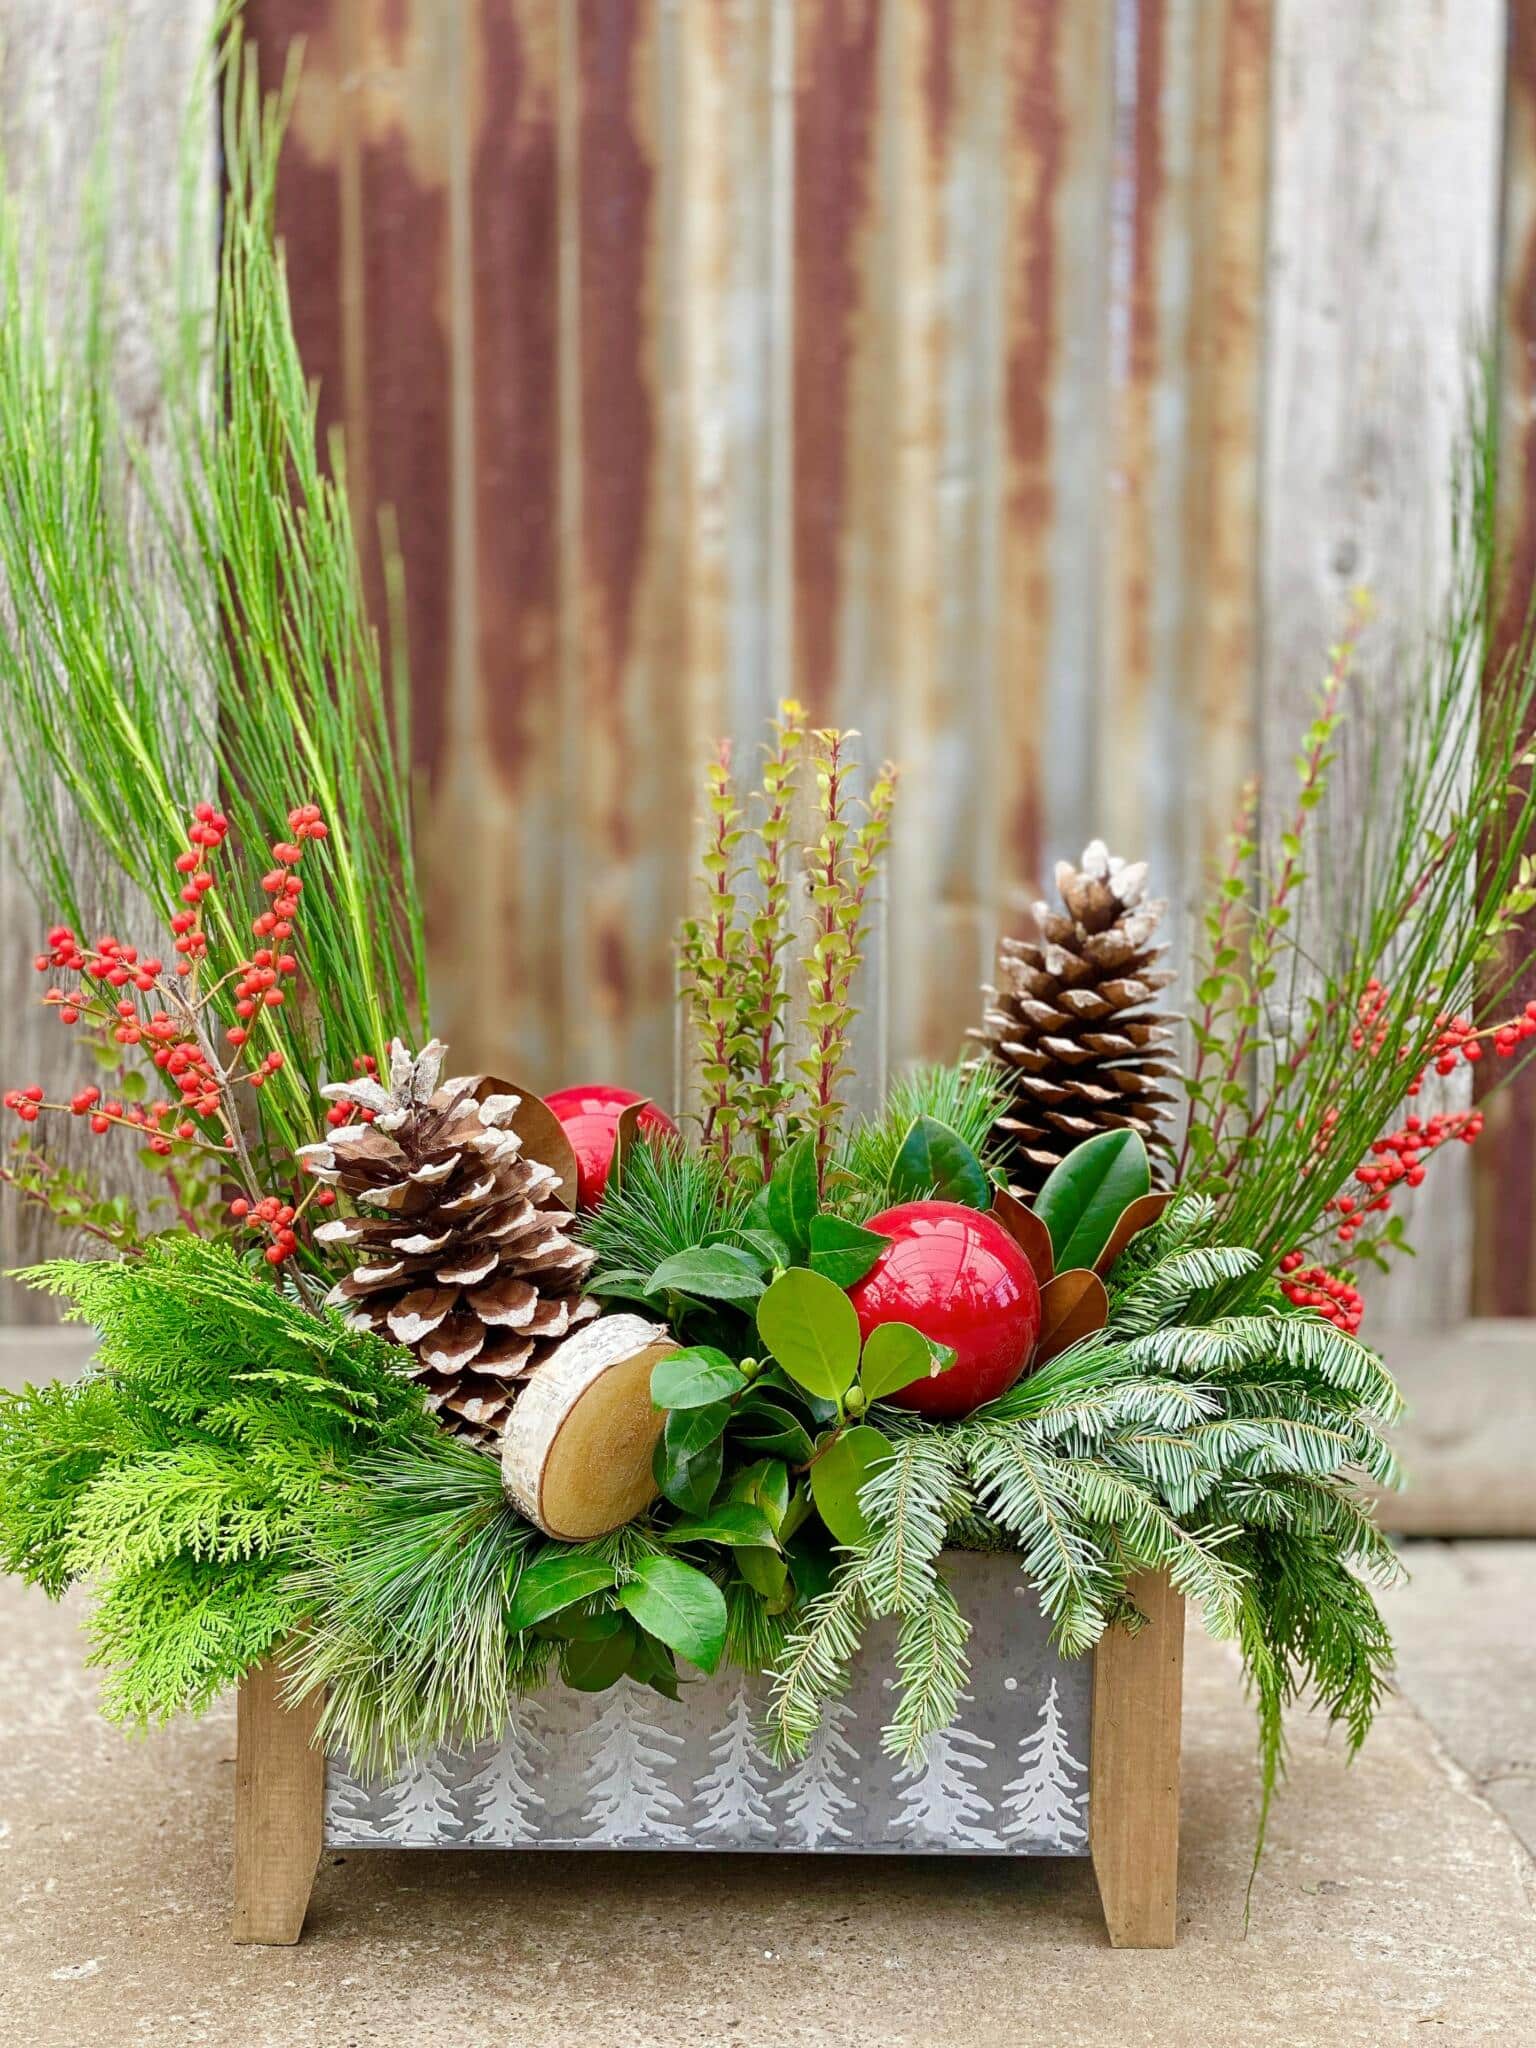 The Watering Can | A large festive arrangement with red berries, red balls, and natural birch and pine cones amongst the winter greens in a rectangular tin continer with a white tree design and wooden legs.